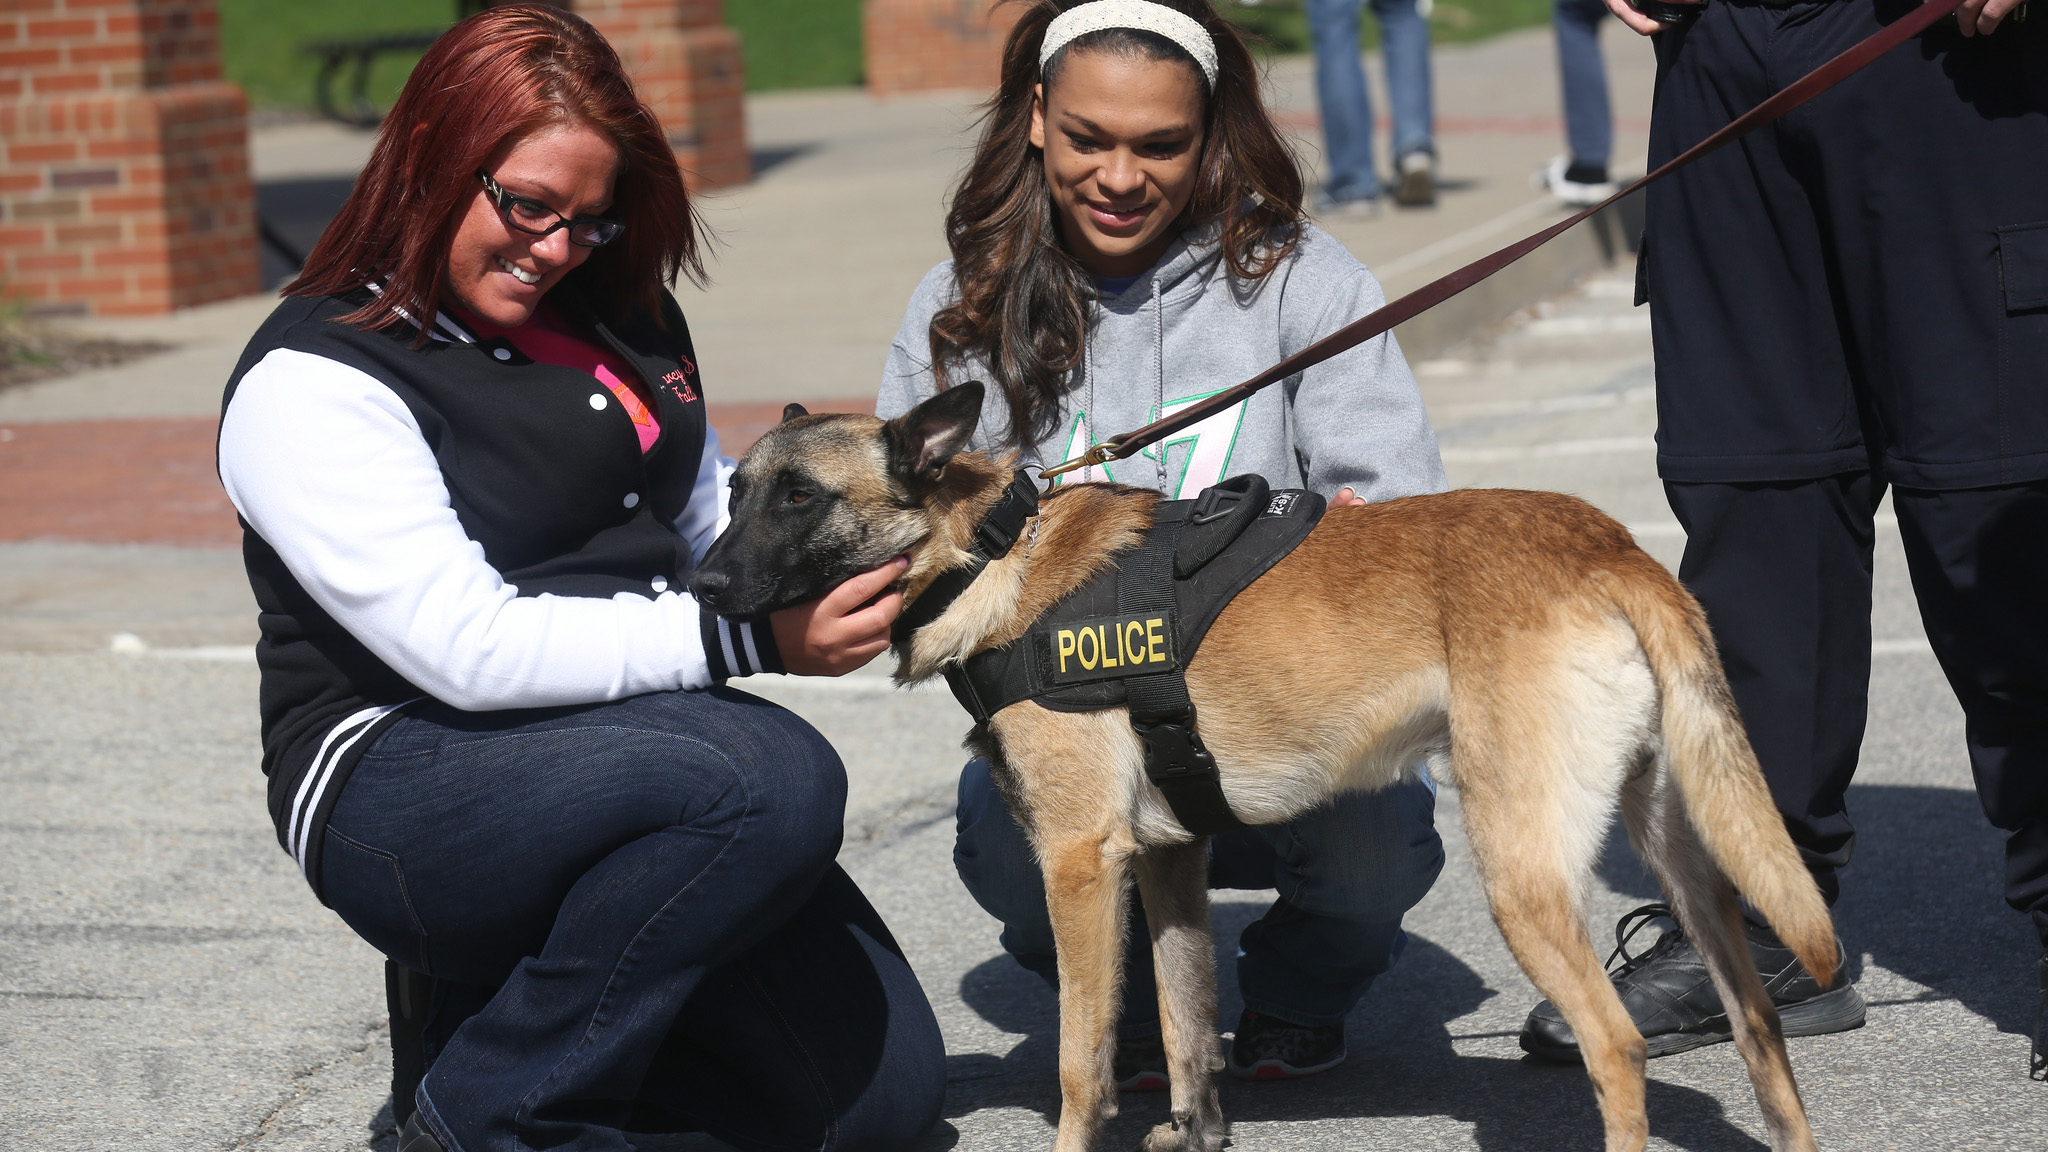 Student pet a K-9 officer on campus.